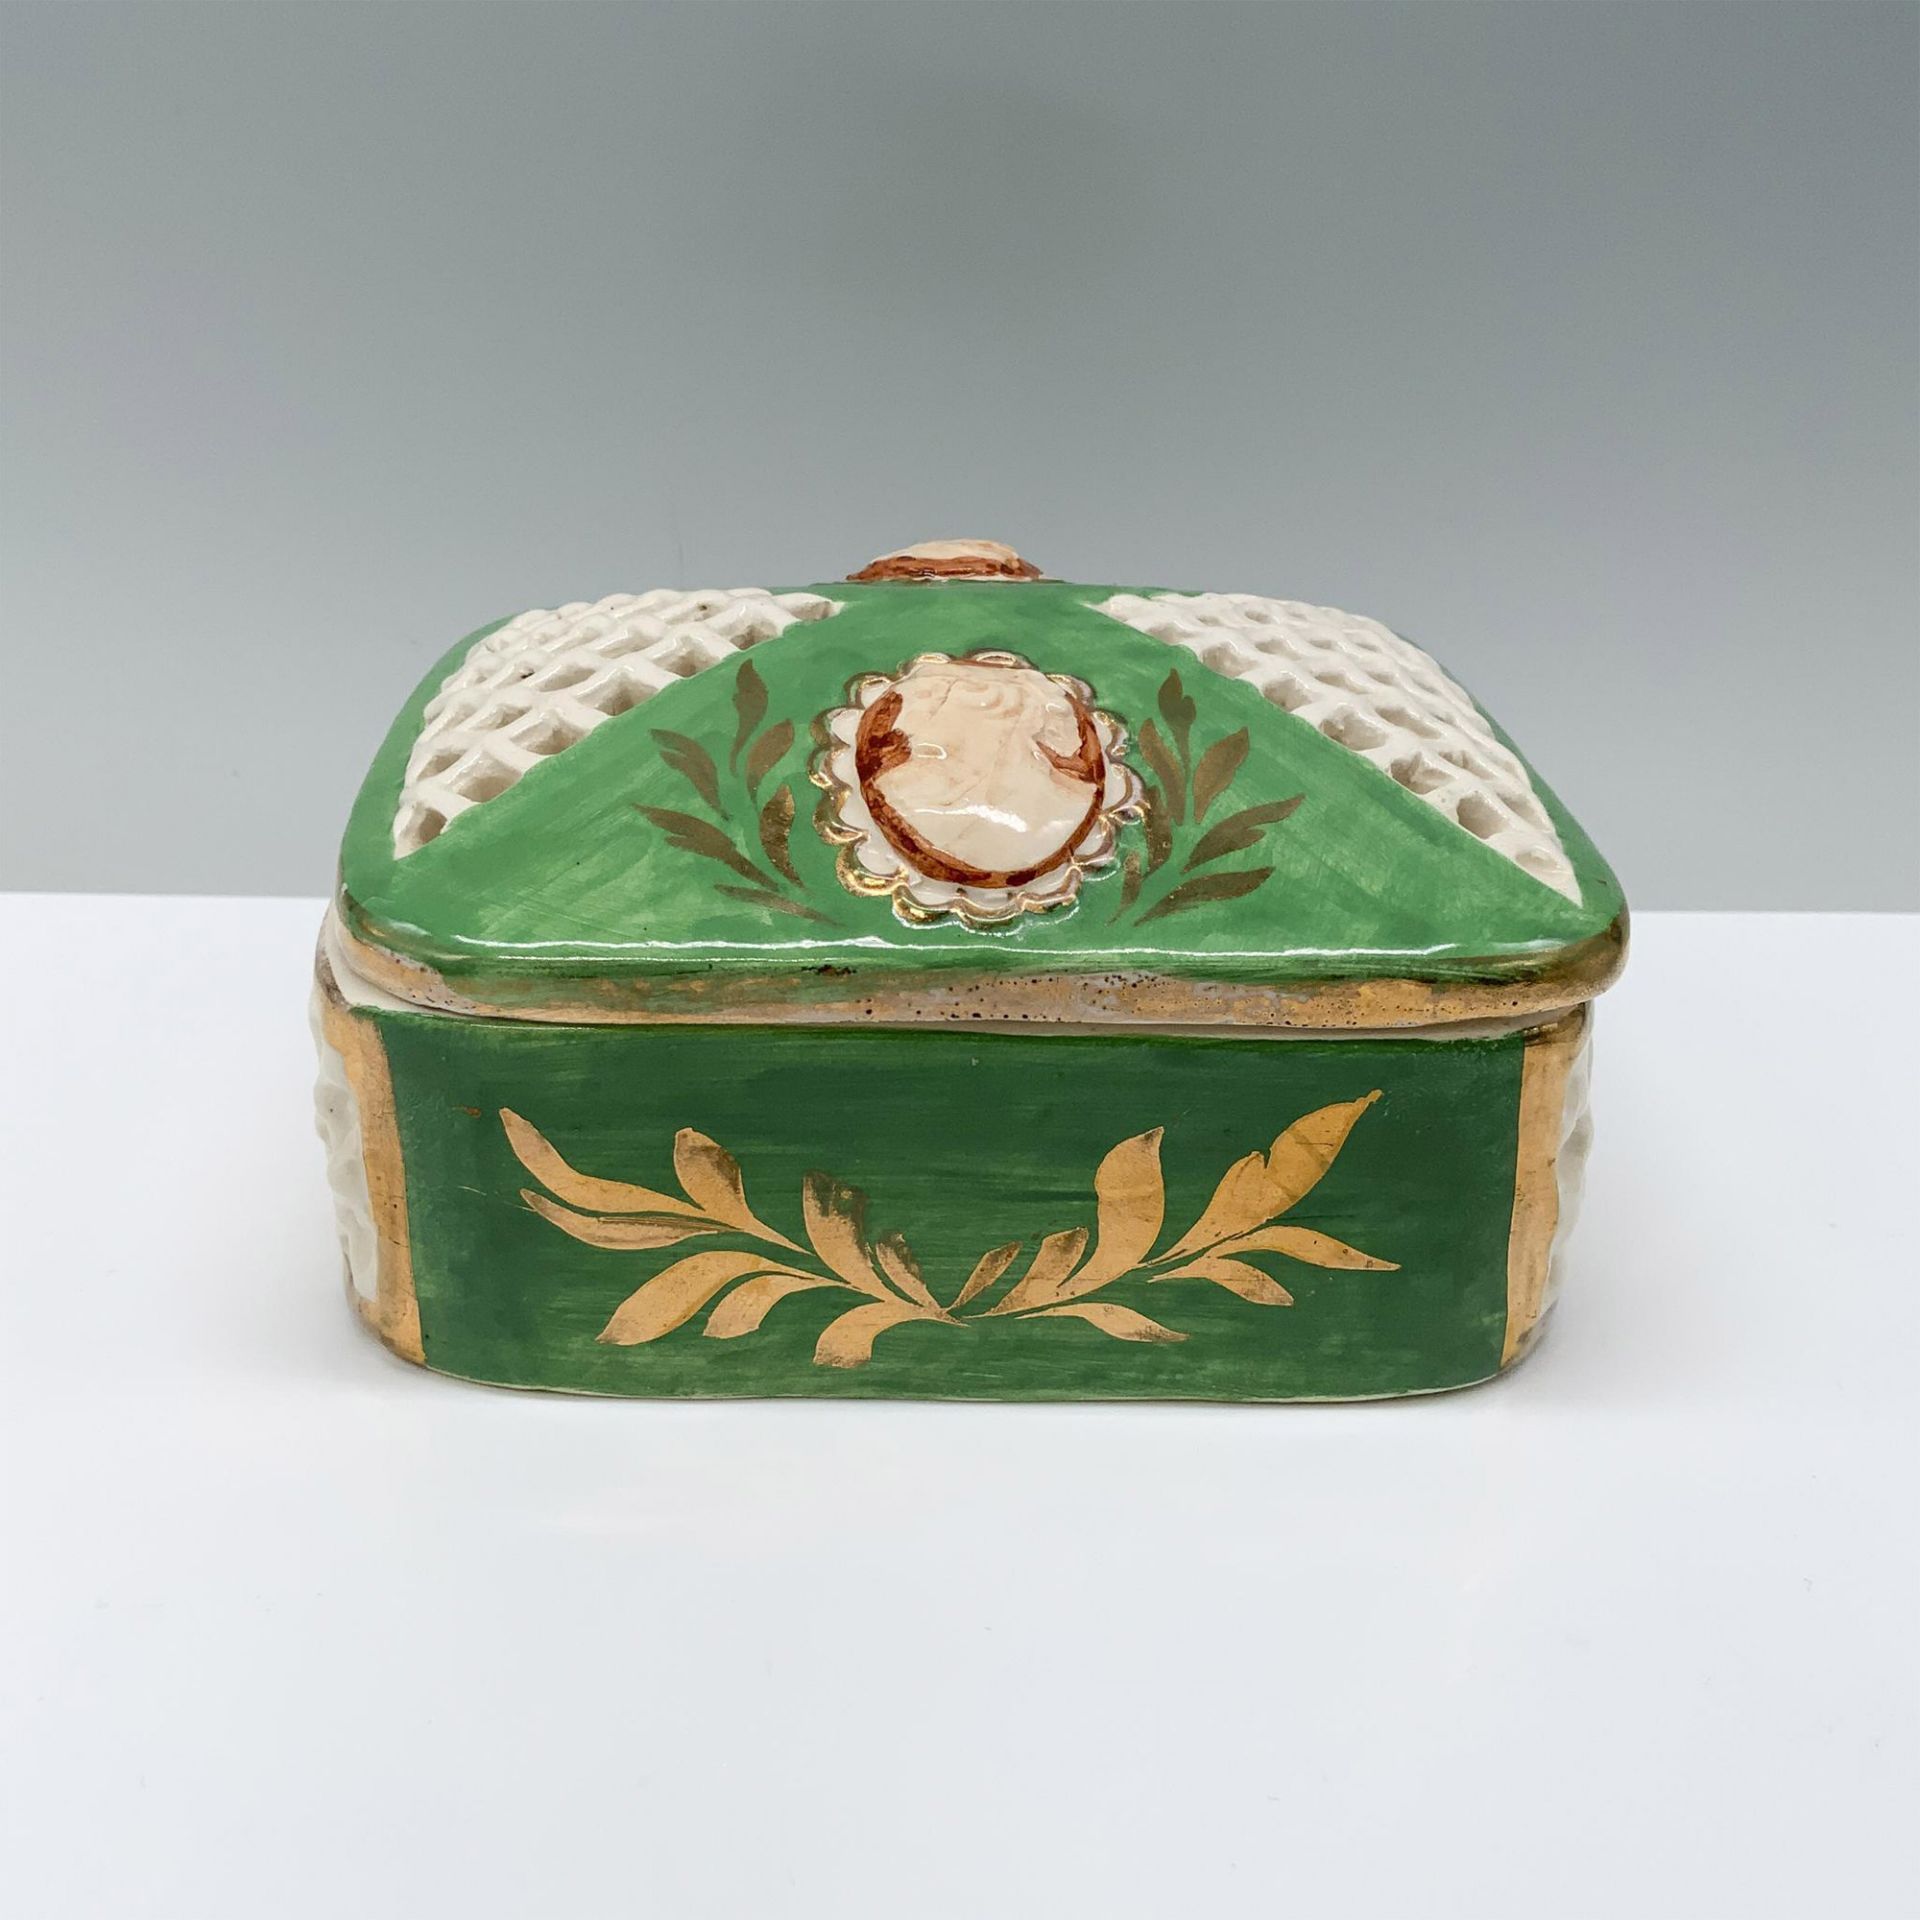 Italian Serving Dish and Lid - Image 2 of 3